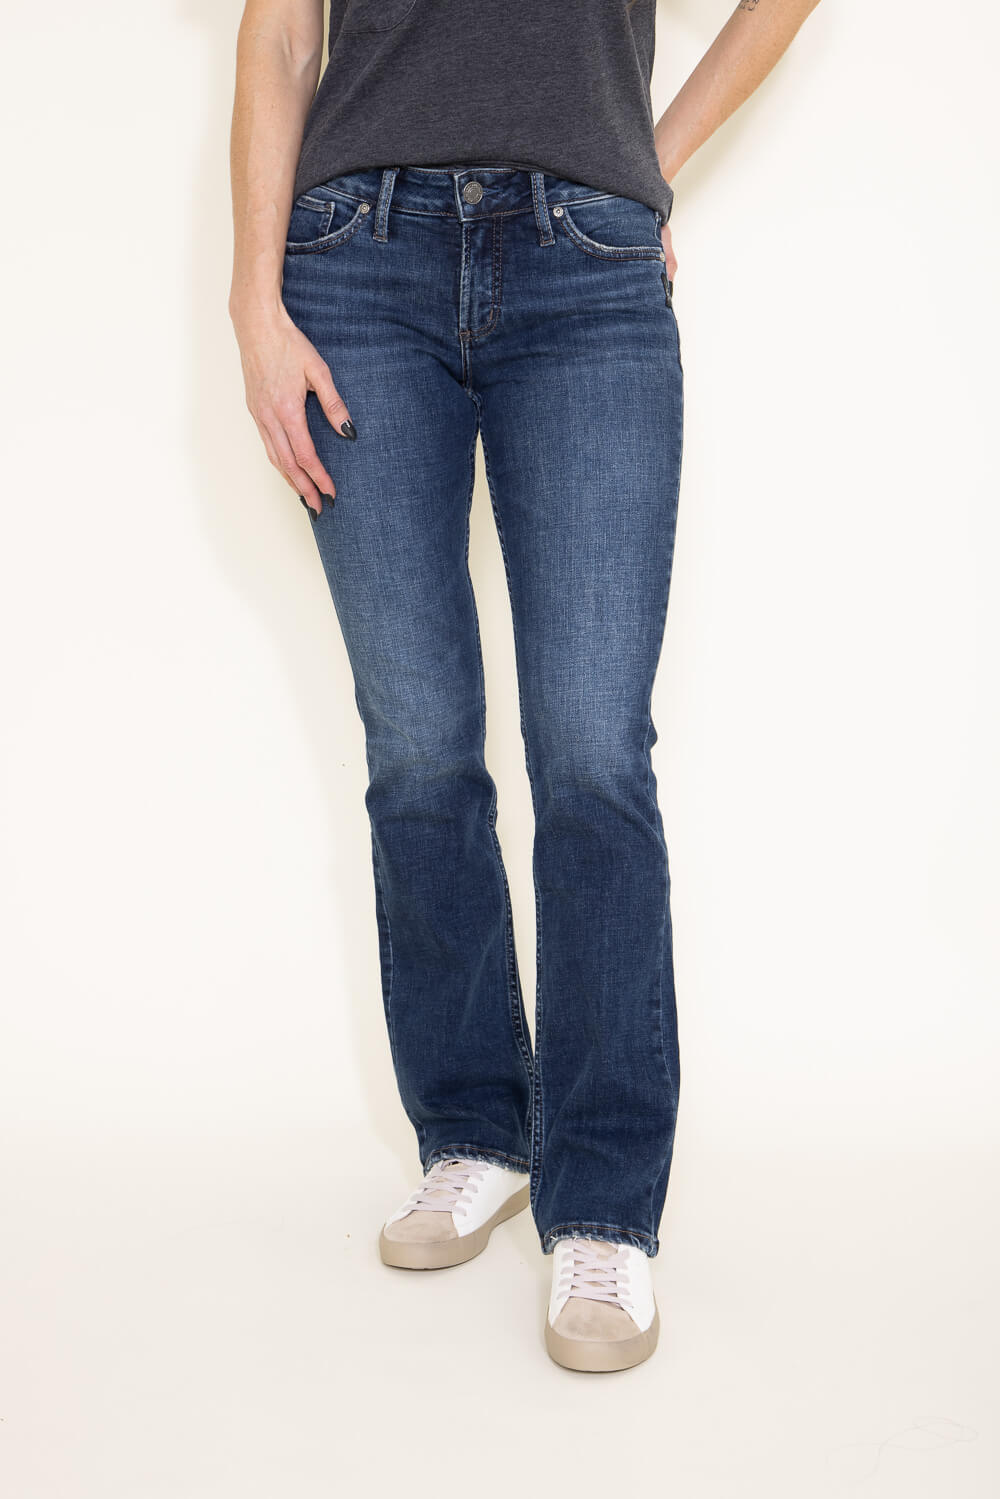 Bootcut Jeans With Embroidery Designs On Back Pocket For Women